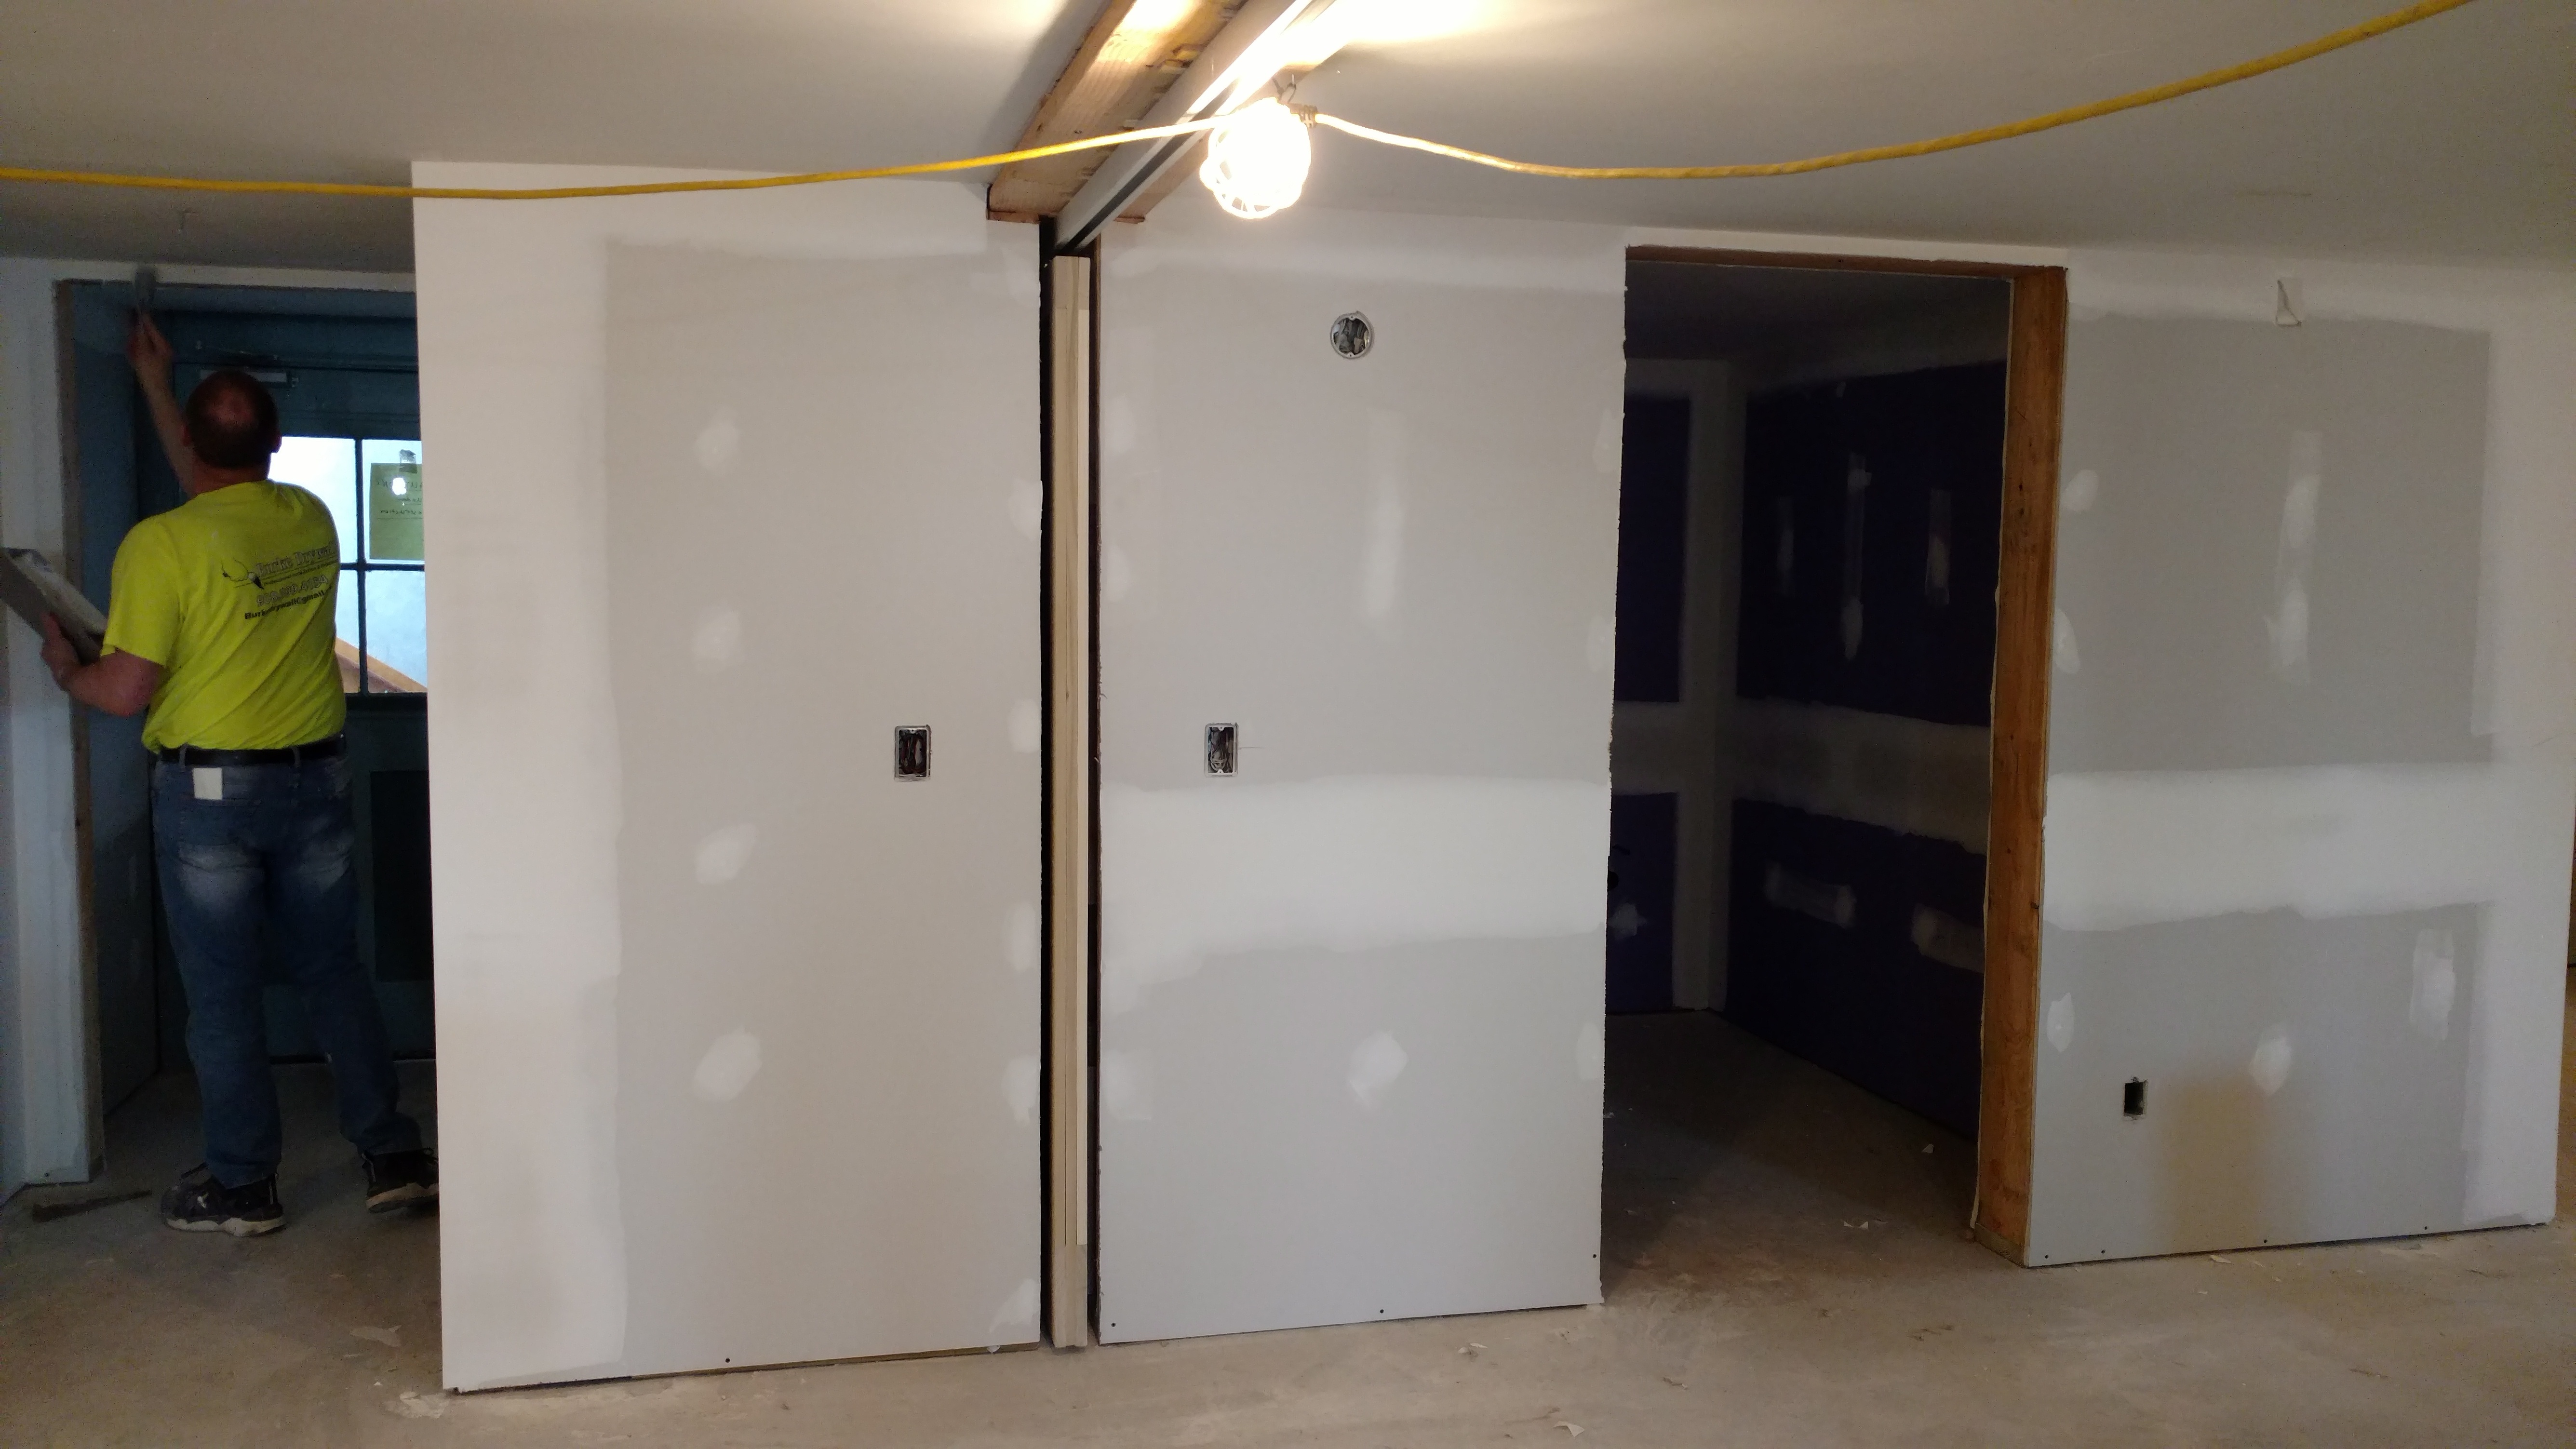 February 21_2019_Spackling_and_retracted_sliding_door